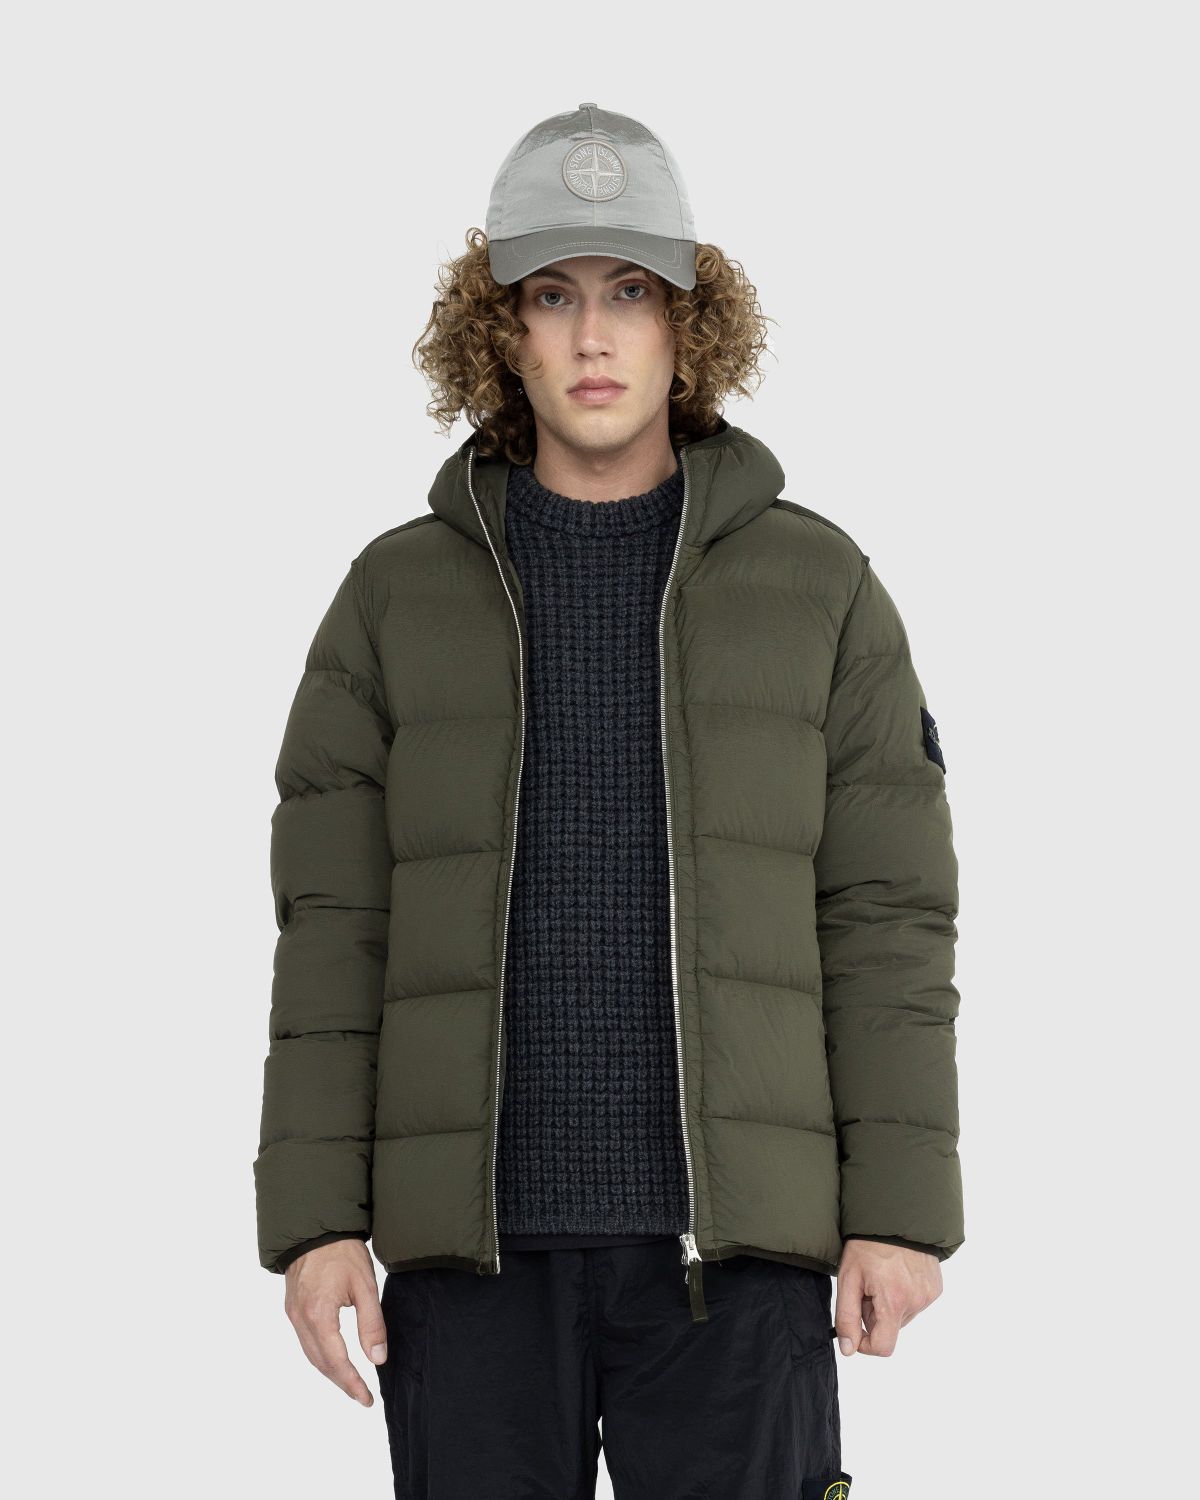 Stone Island – Real Down Jacket Olive - Outerwear - Green - Image 2